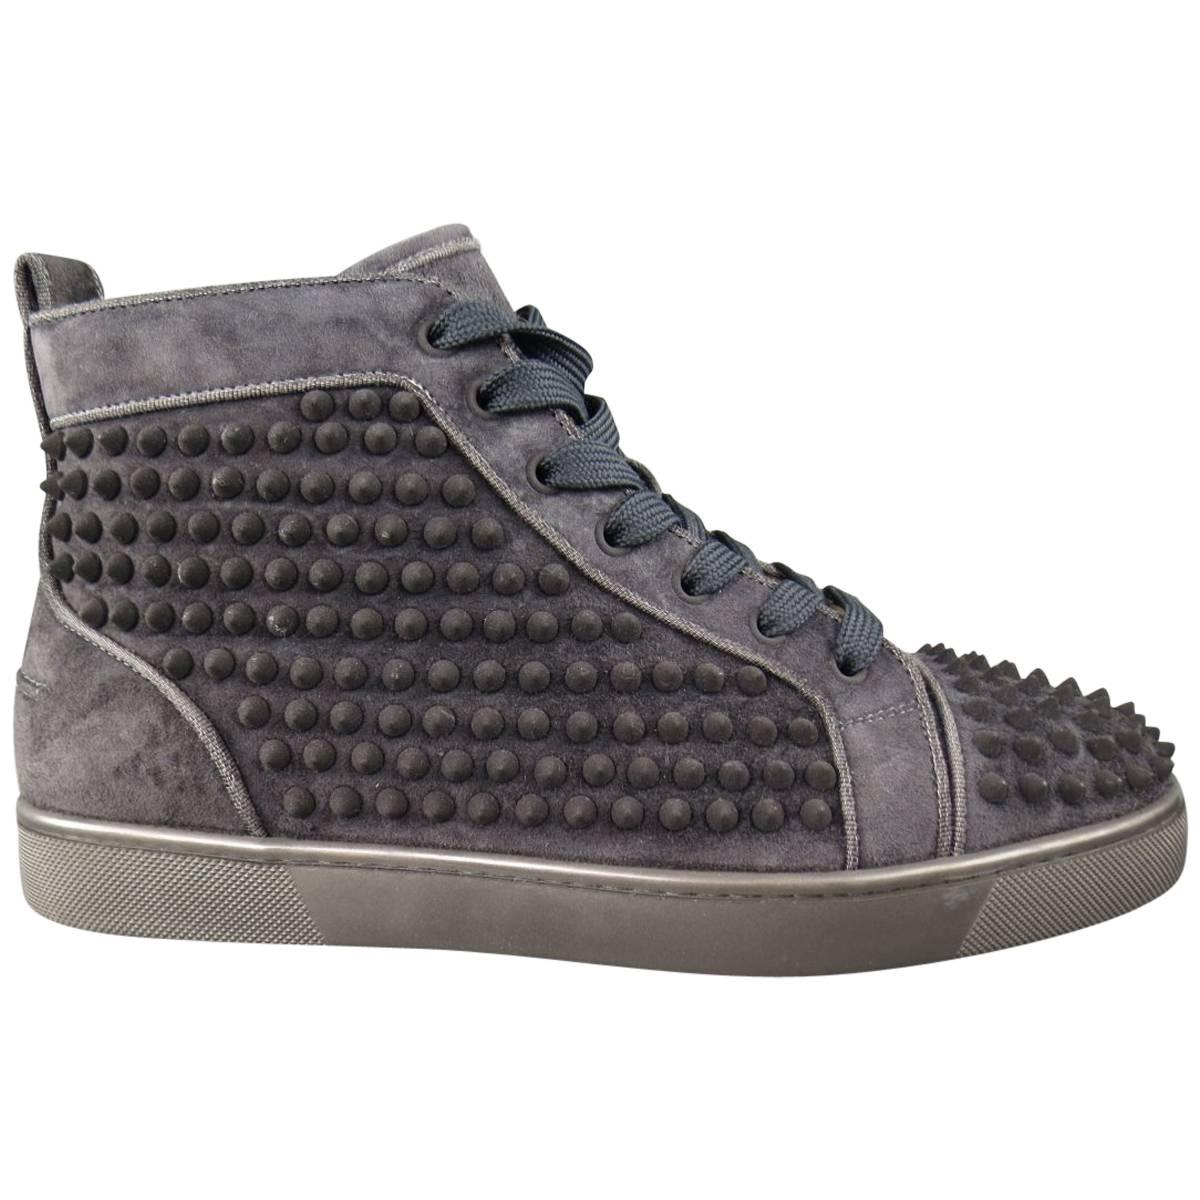 Men's CHRISTIAN LOUBOUTIN Size 8 Charcoal Suede Louis Spike High Top Sneakers